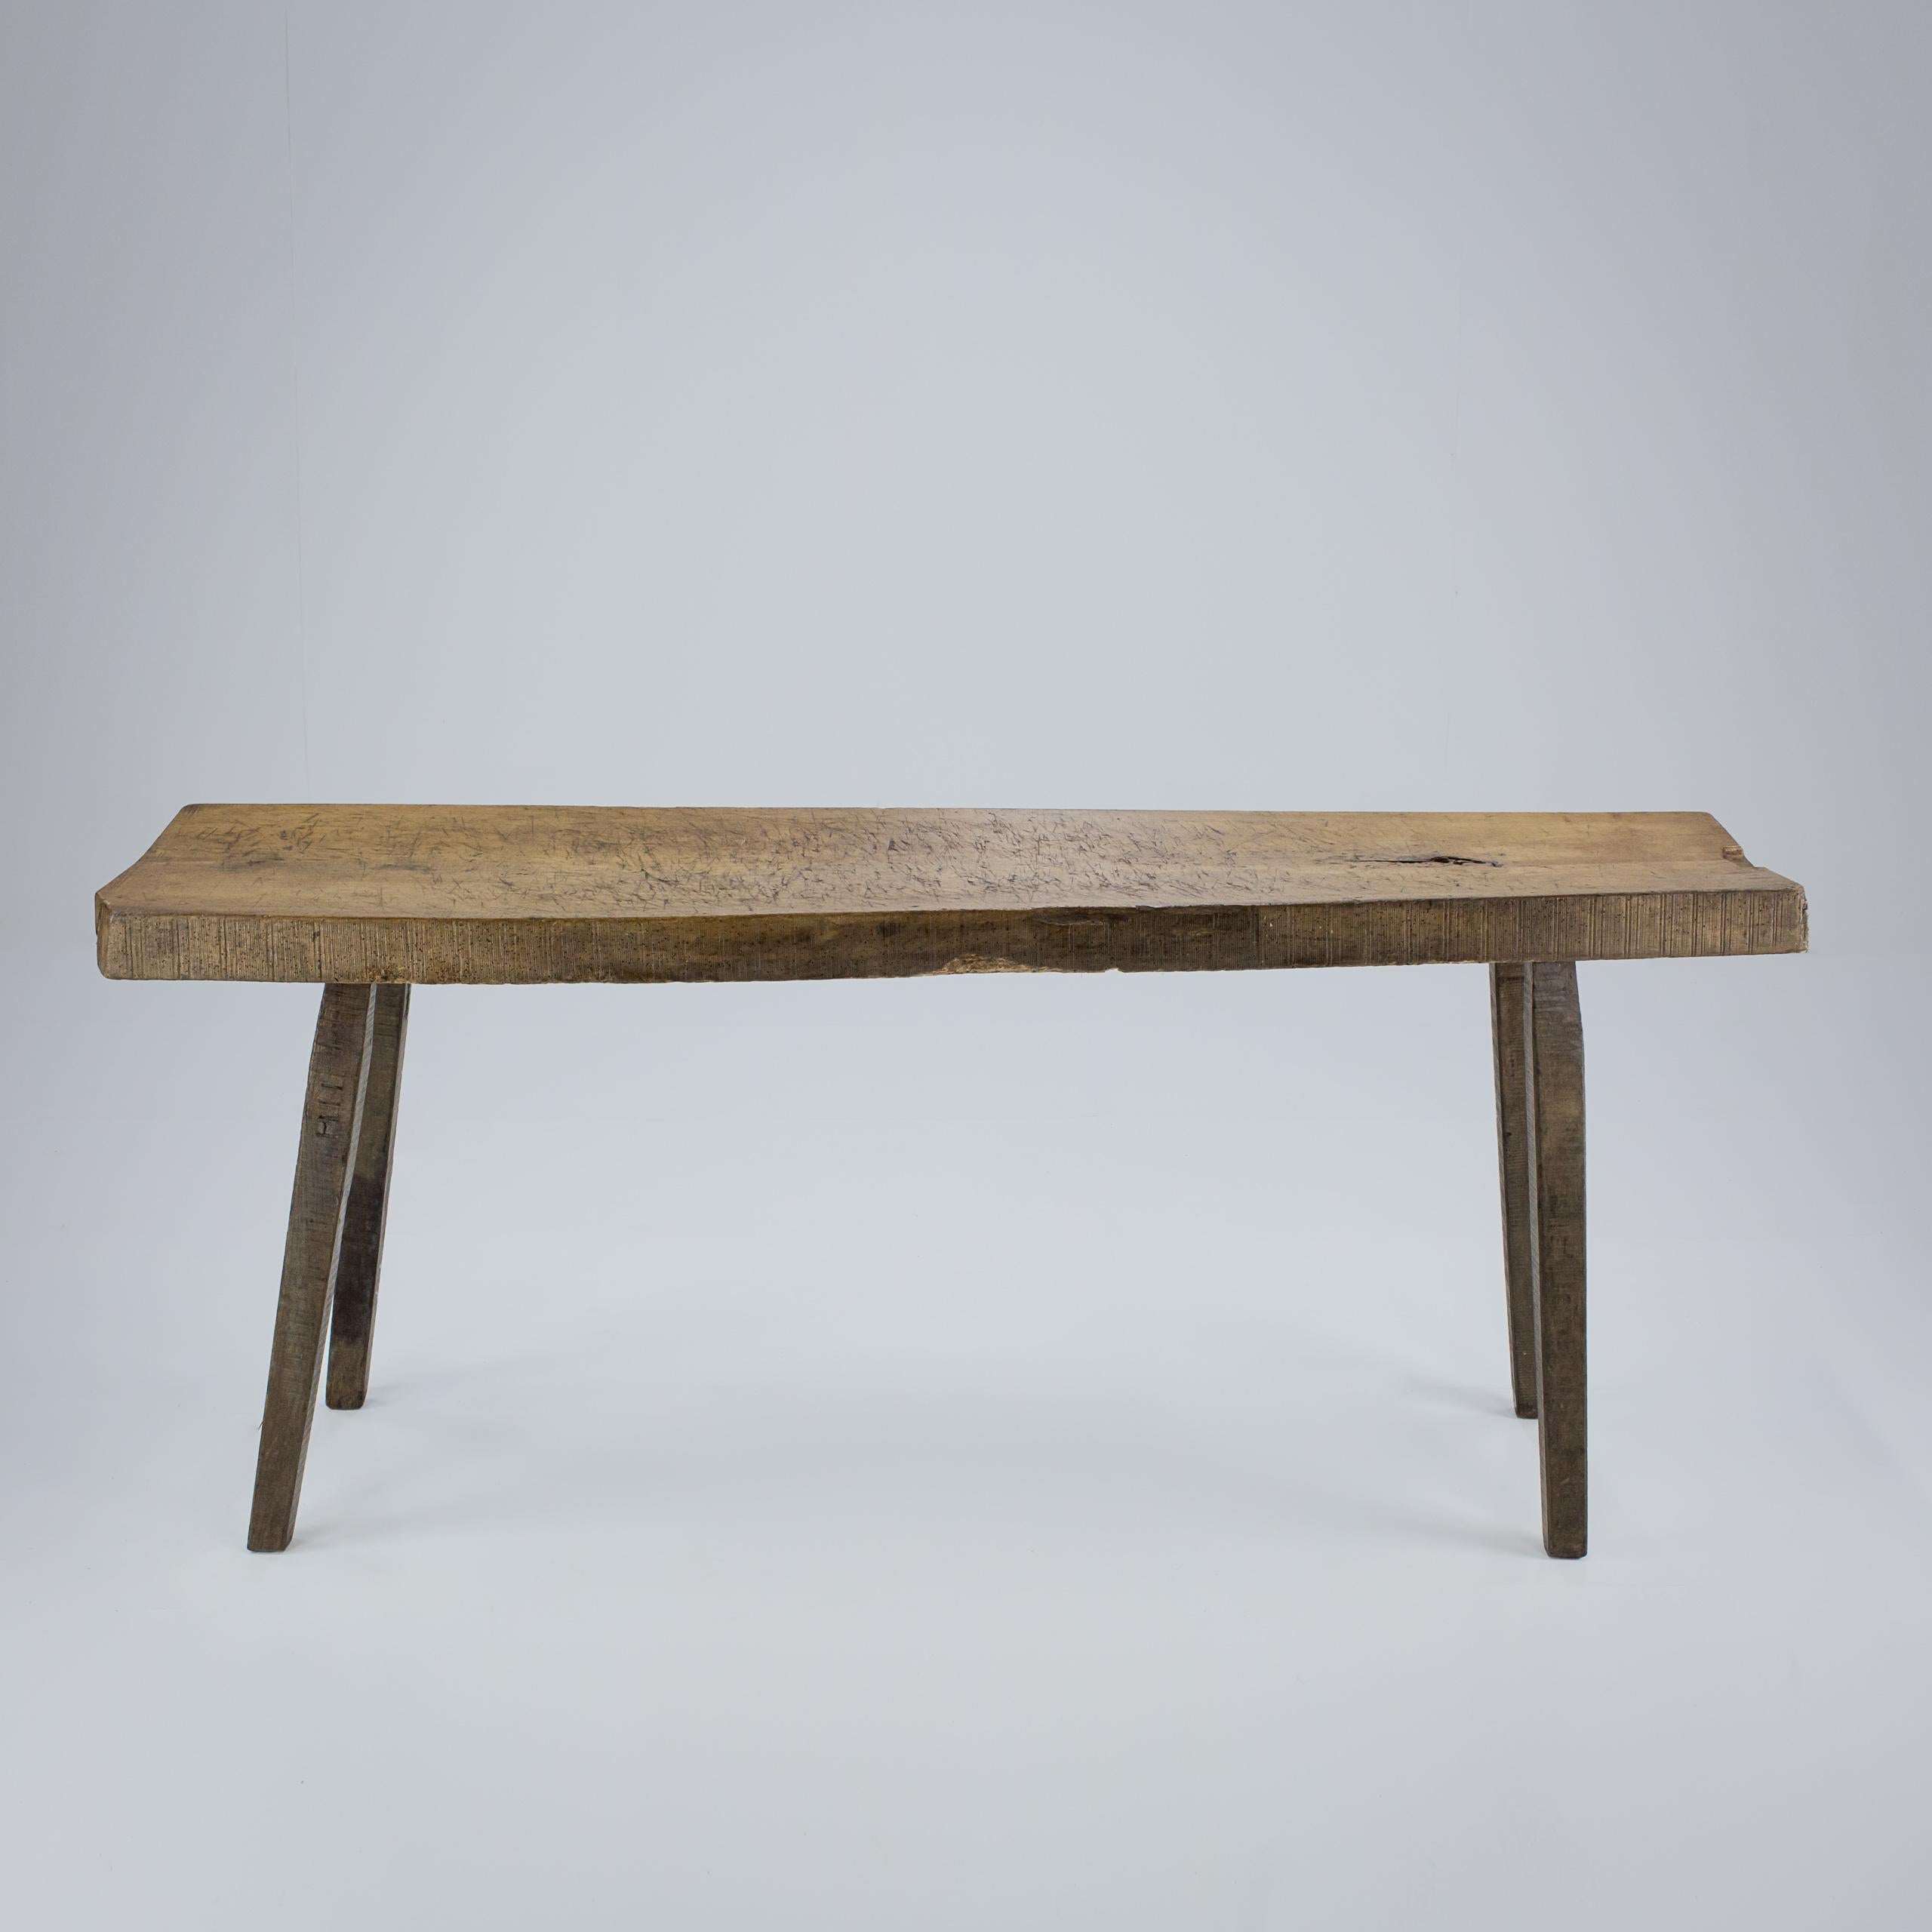 Large single plank, slab top table or pig bench. Unusual full height could be used as a dining table or large console. Four Primitive staked legs each with carved numerals. Well patinated, with marks from use beech slab top. 9cm thick slab. France